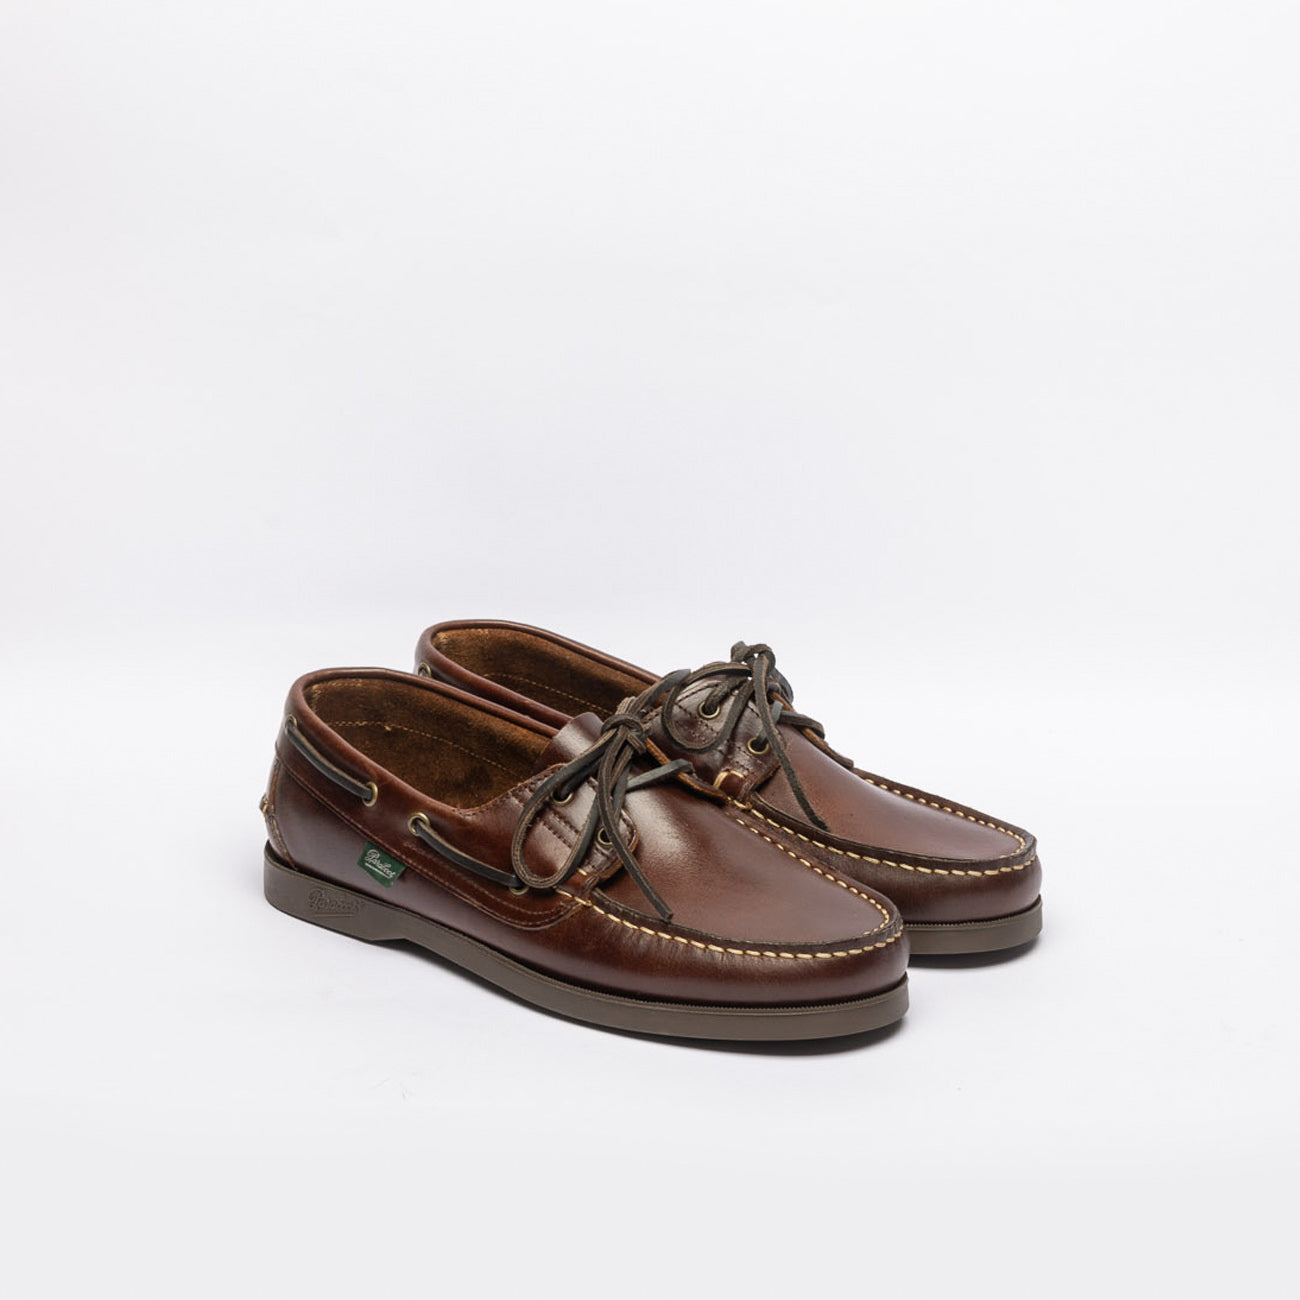 Paraboot Barth brown leather boat shoe